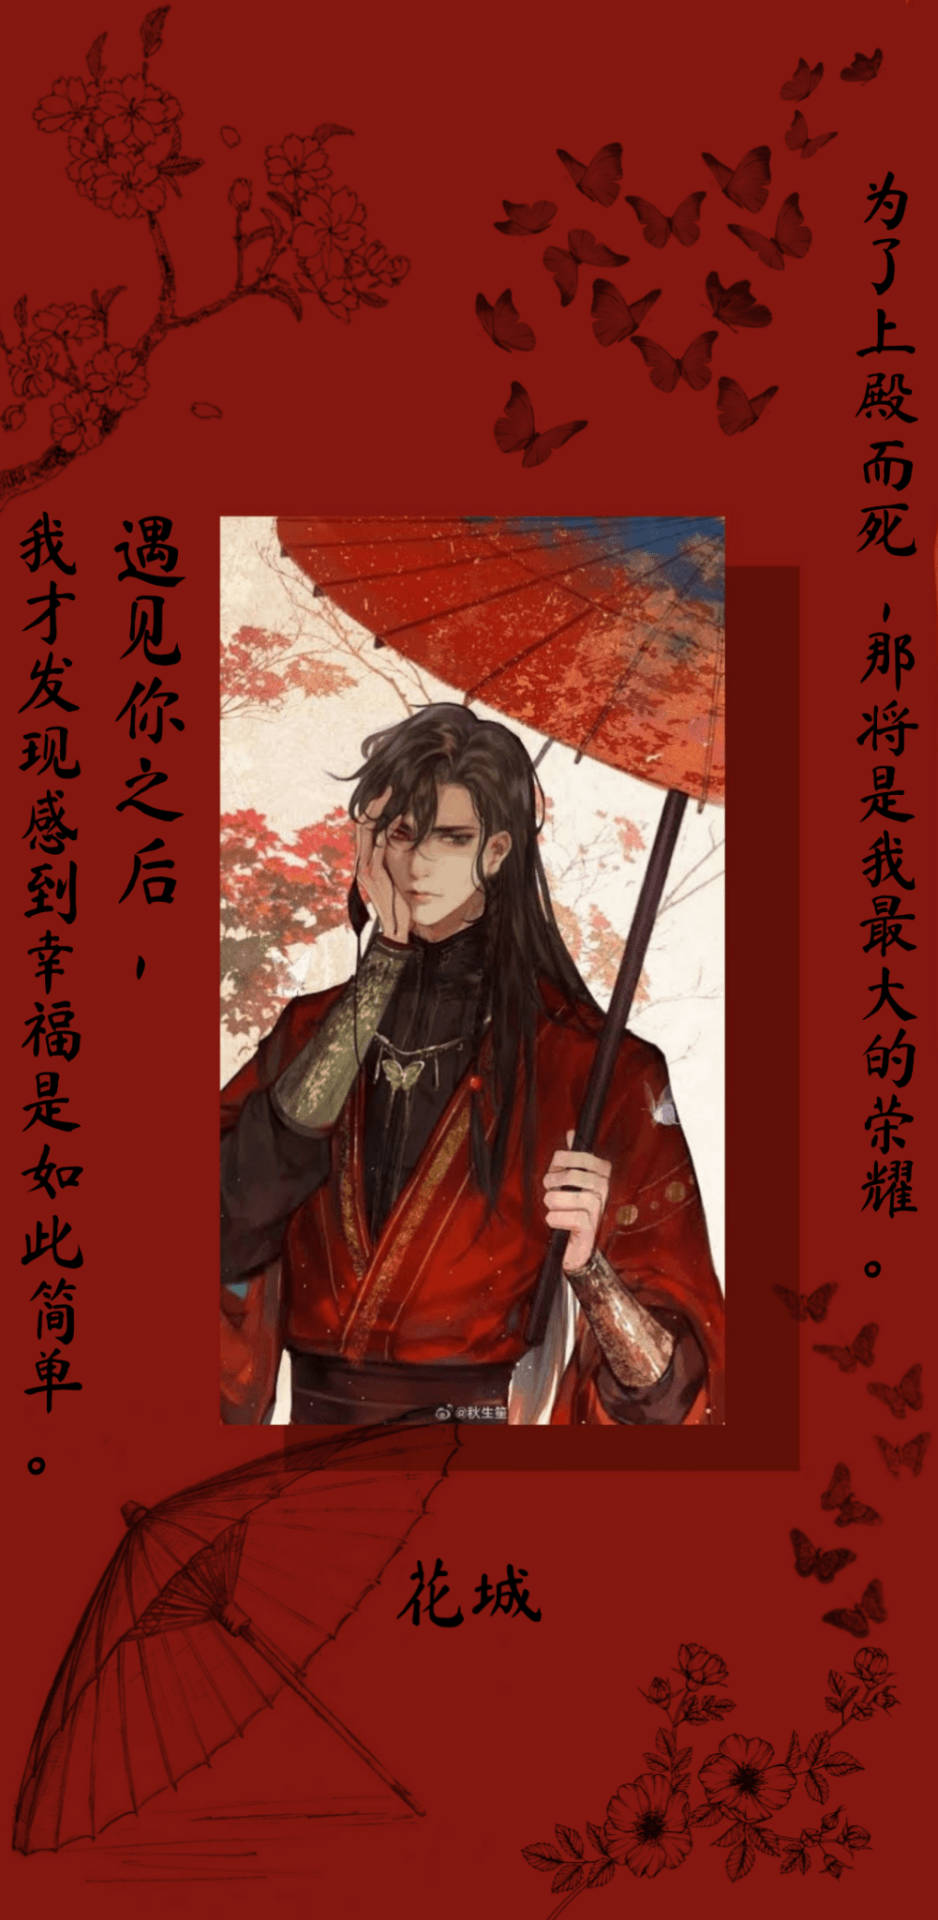 Hua Cheng With Chinese Characters